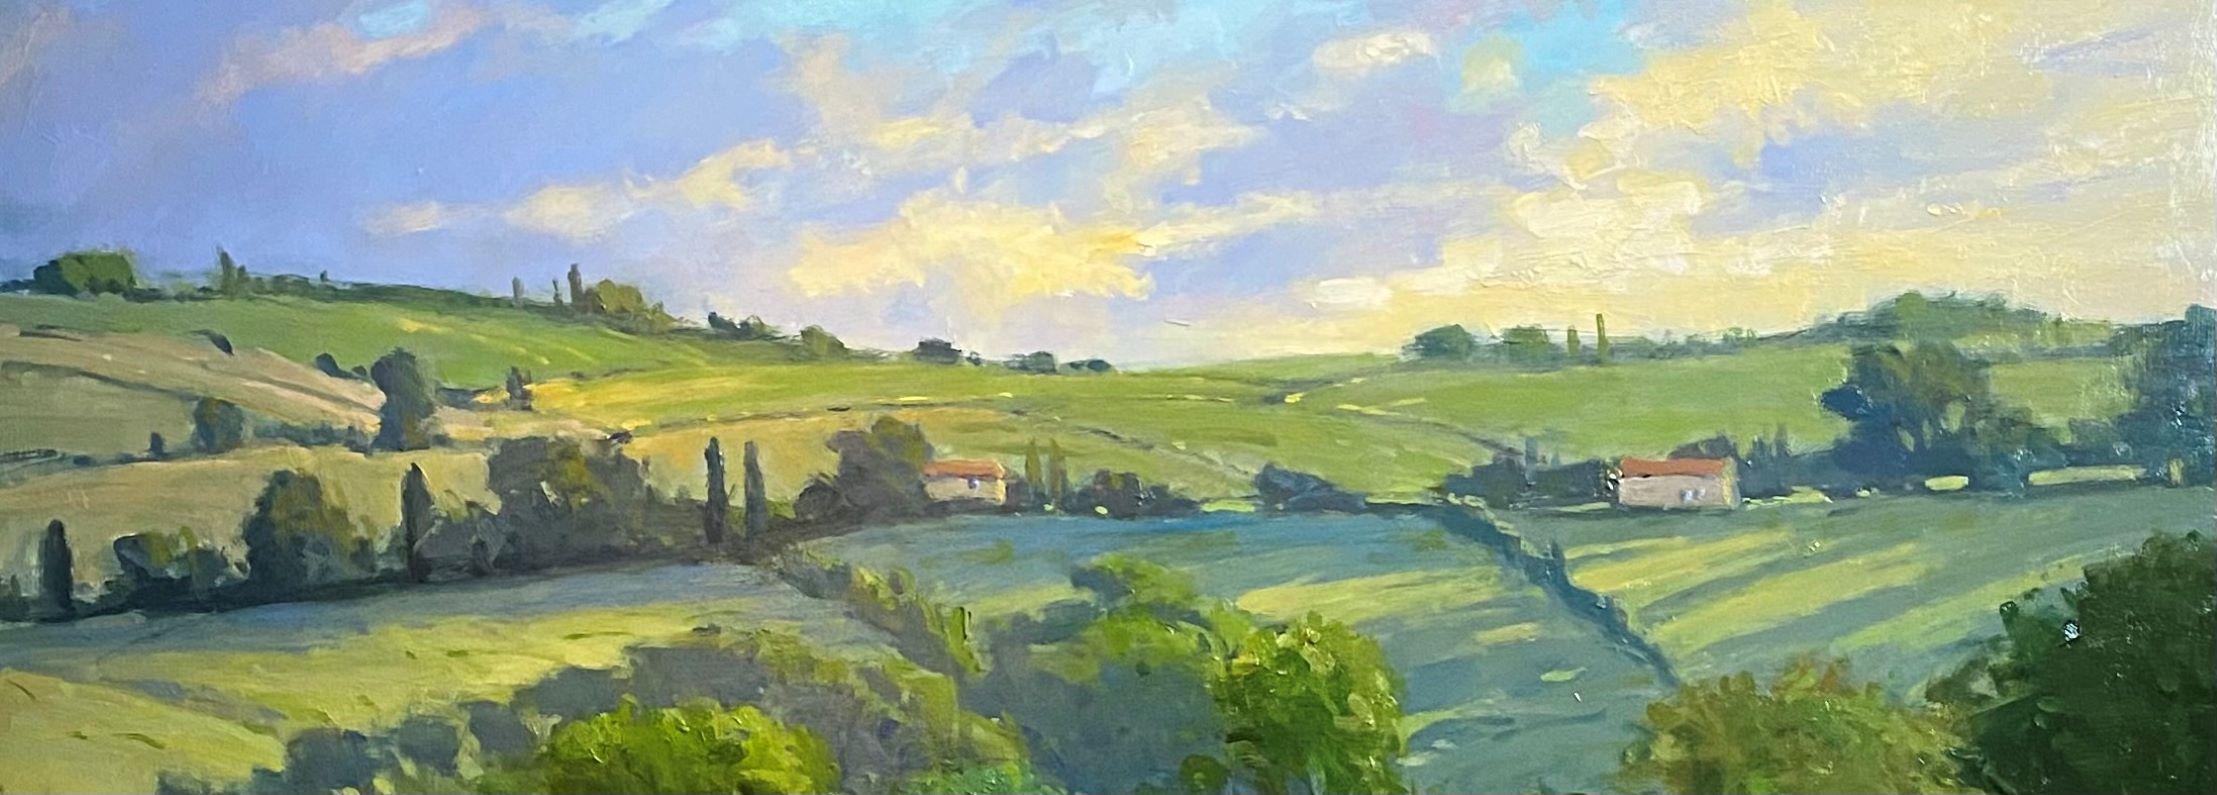 Morning Vineyard, Provence, original 24x30 French impressionist landscape - Impressionist Painting by Jim Rodgers